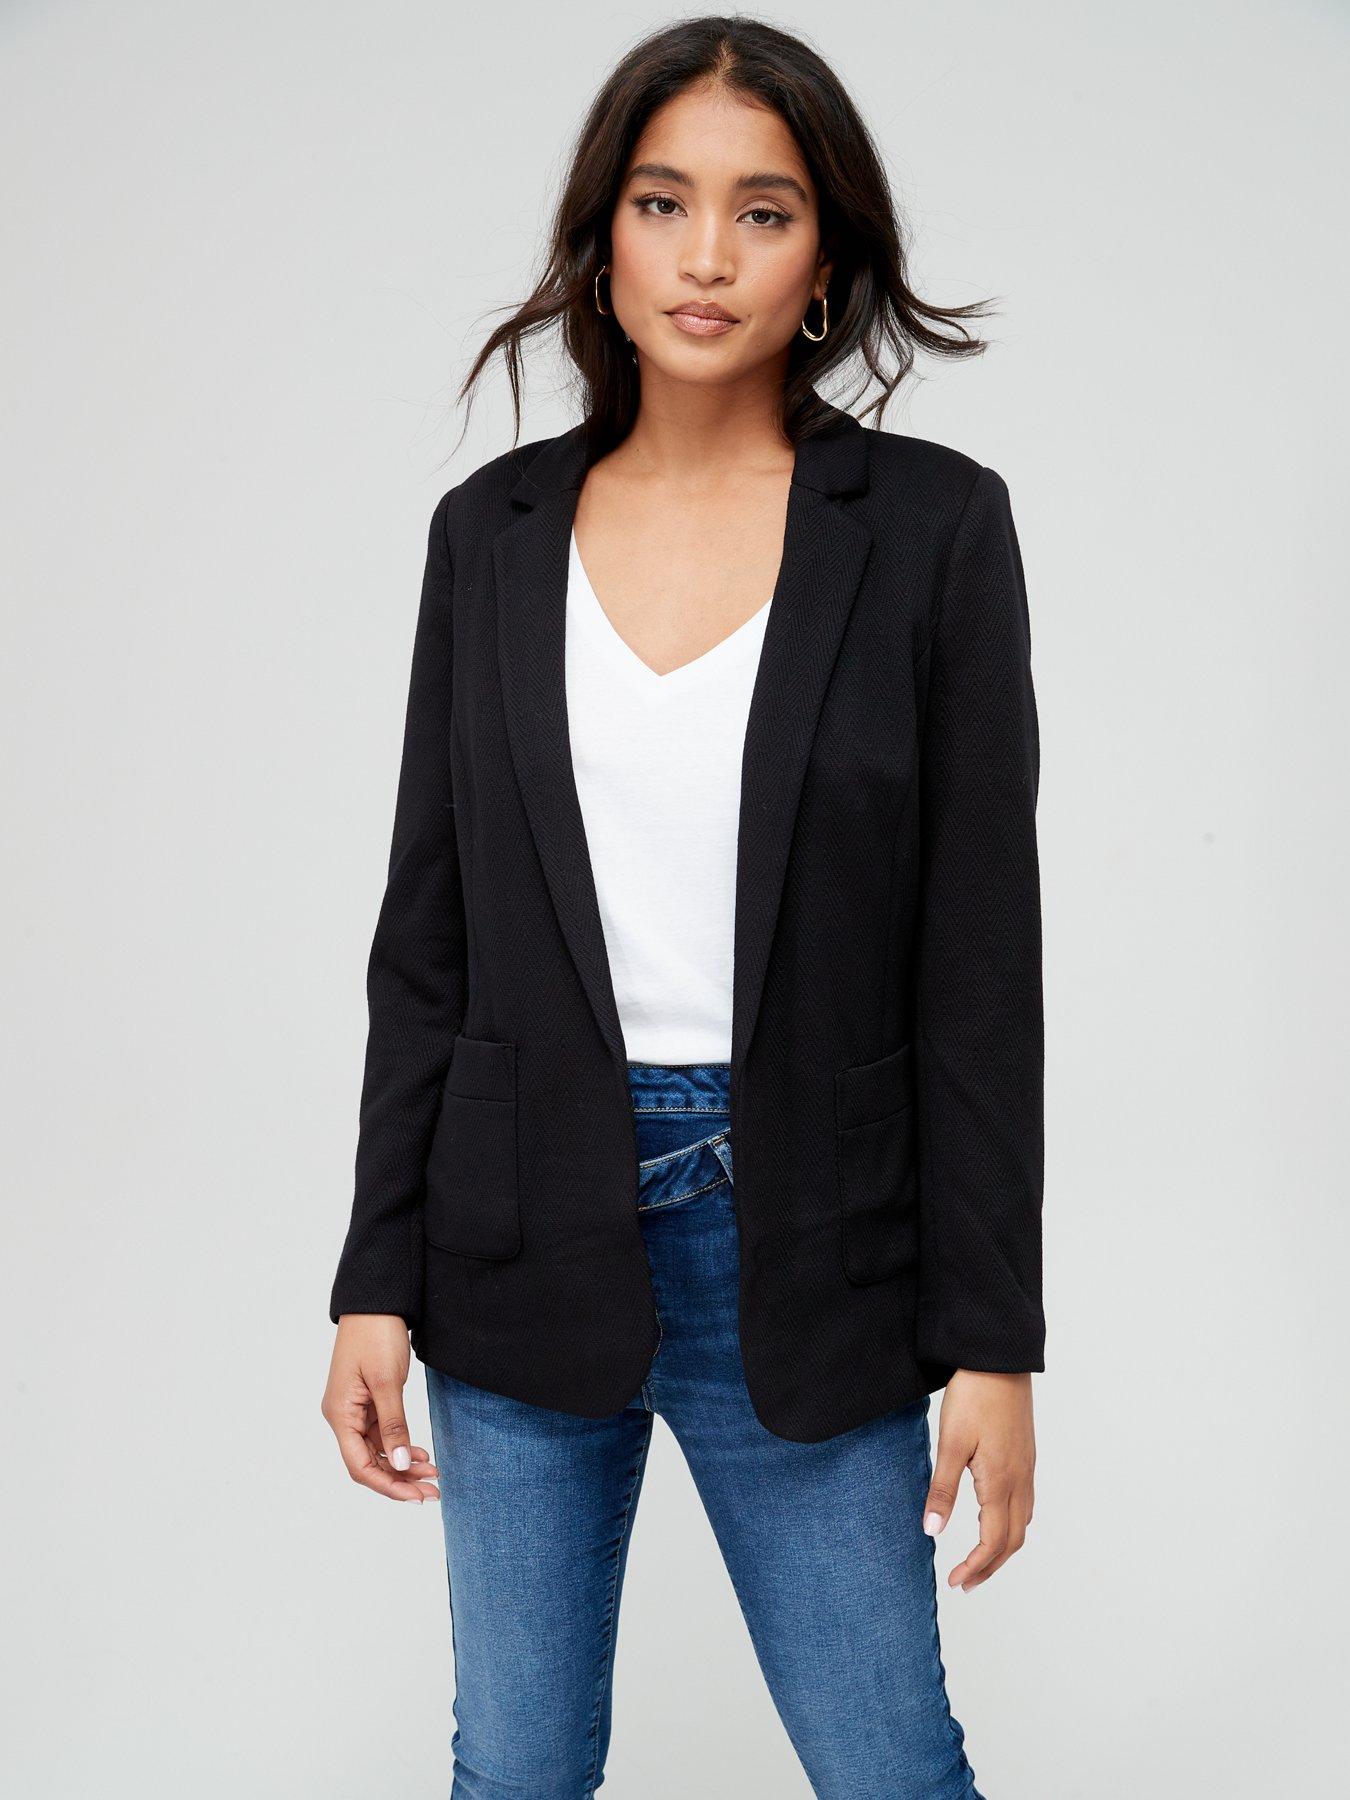 8 Incredibly Chic Black-Blazer Outfits for Women, Period